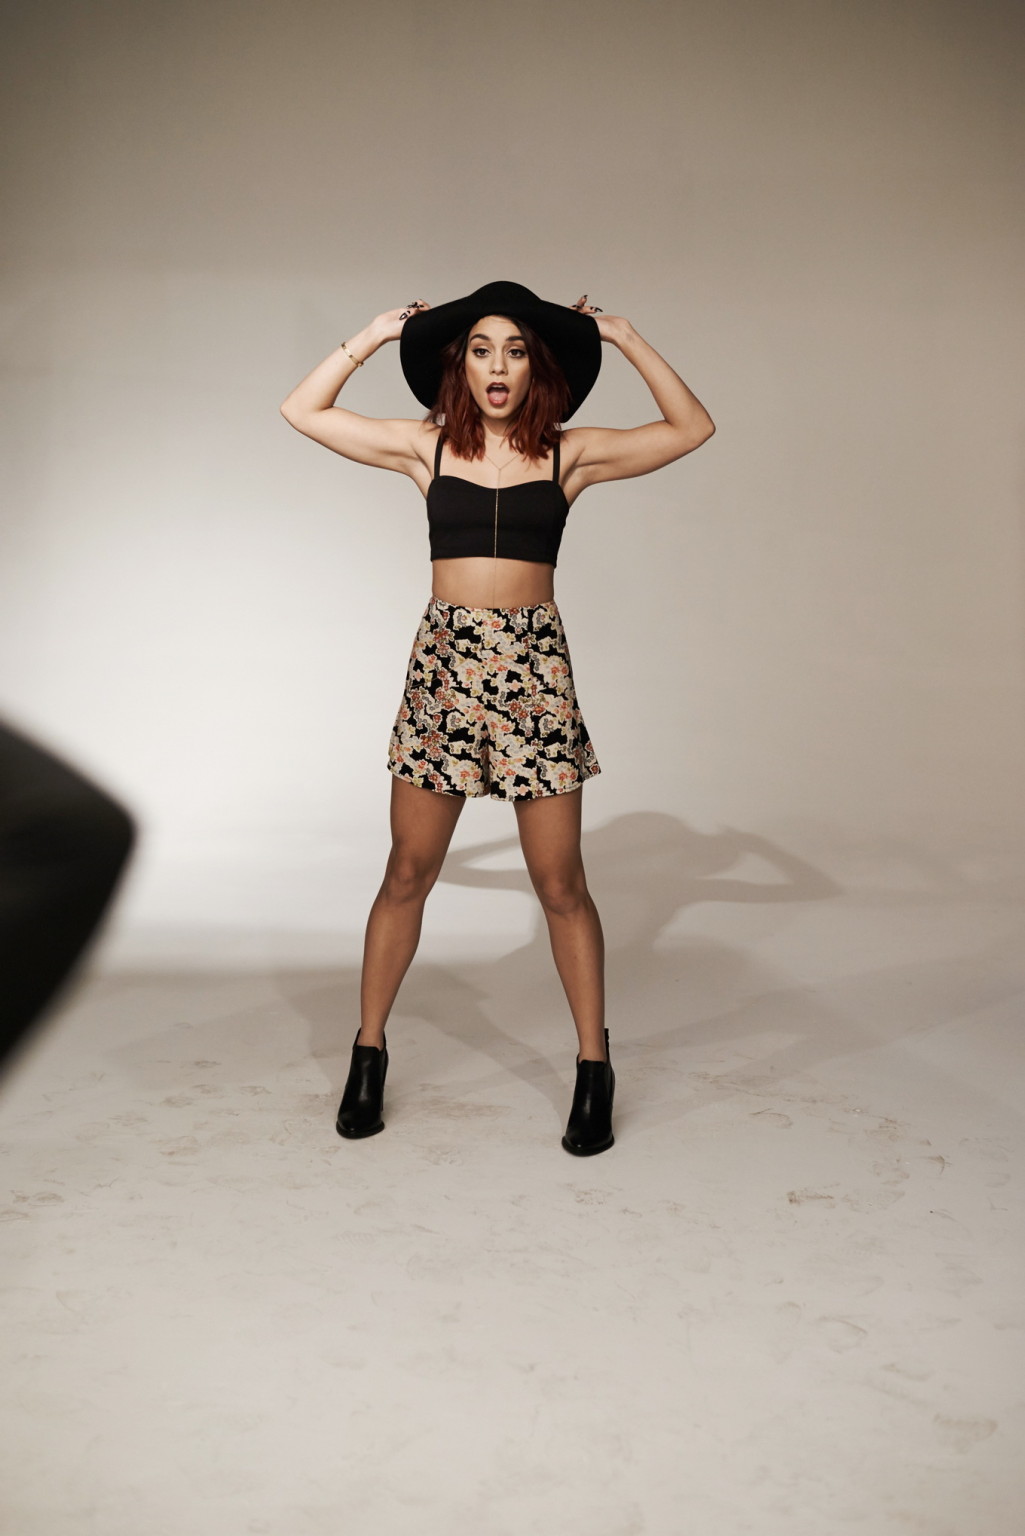 Vanessa Hudgens wearing skimpy undies and outfit for Bongo Spring 2015 Campaign  #75173994